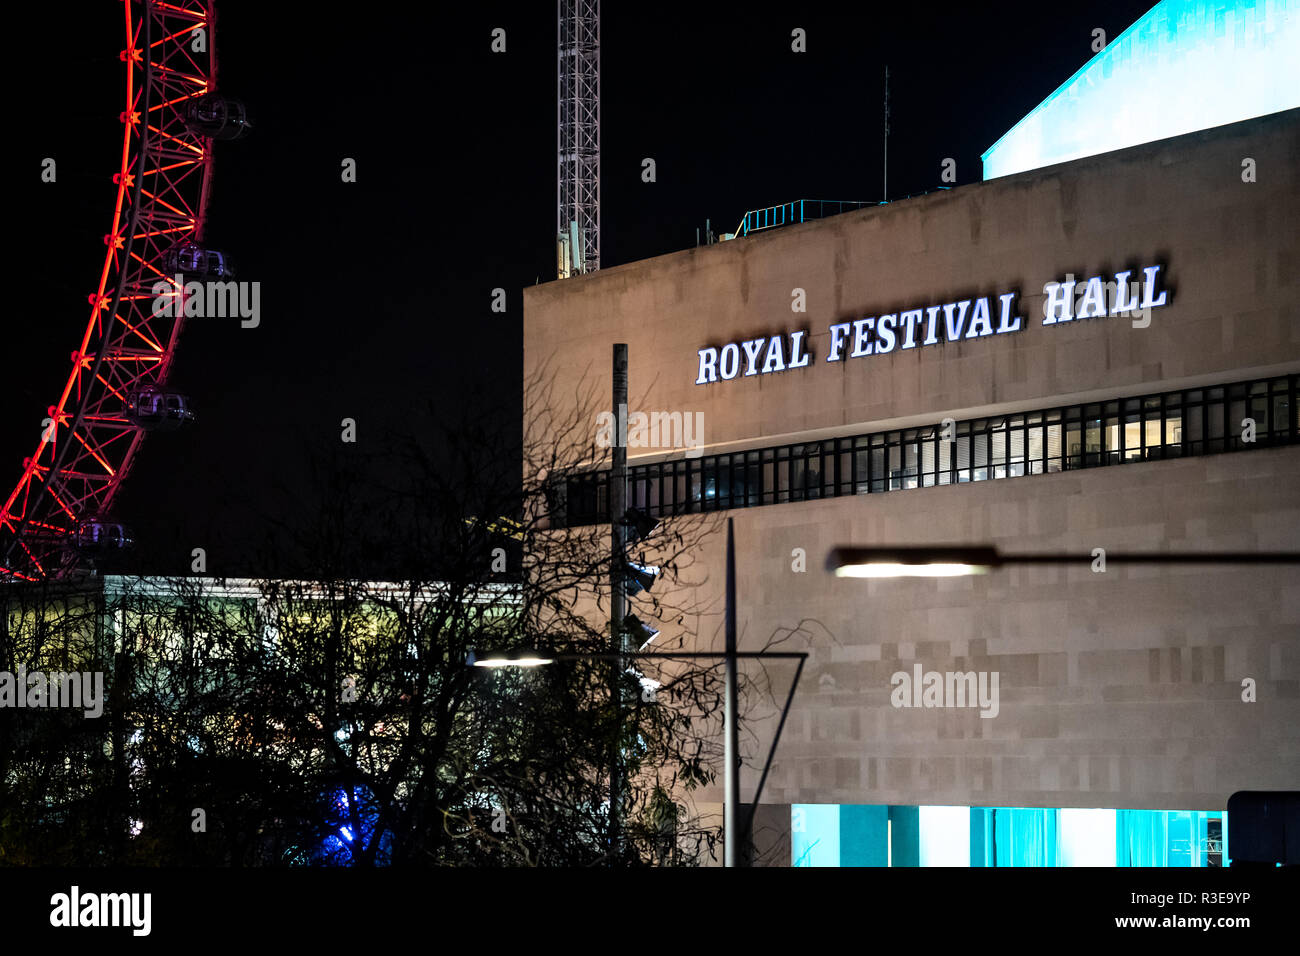 A view of the Royal Festival Hall next to the London Eye at night Stock Photo